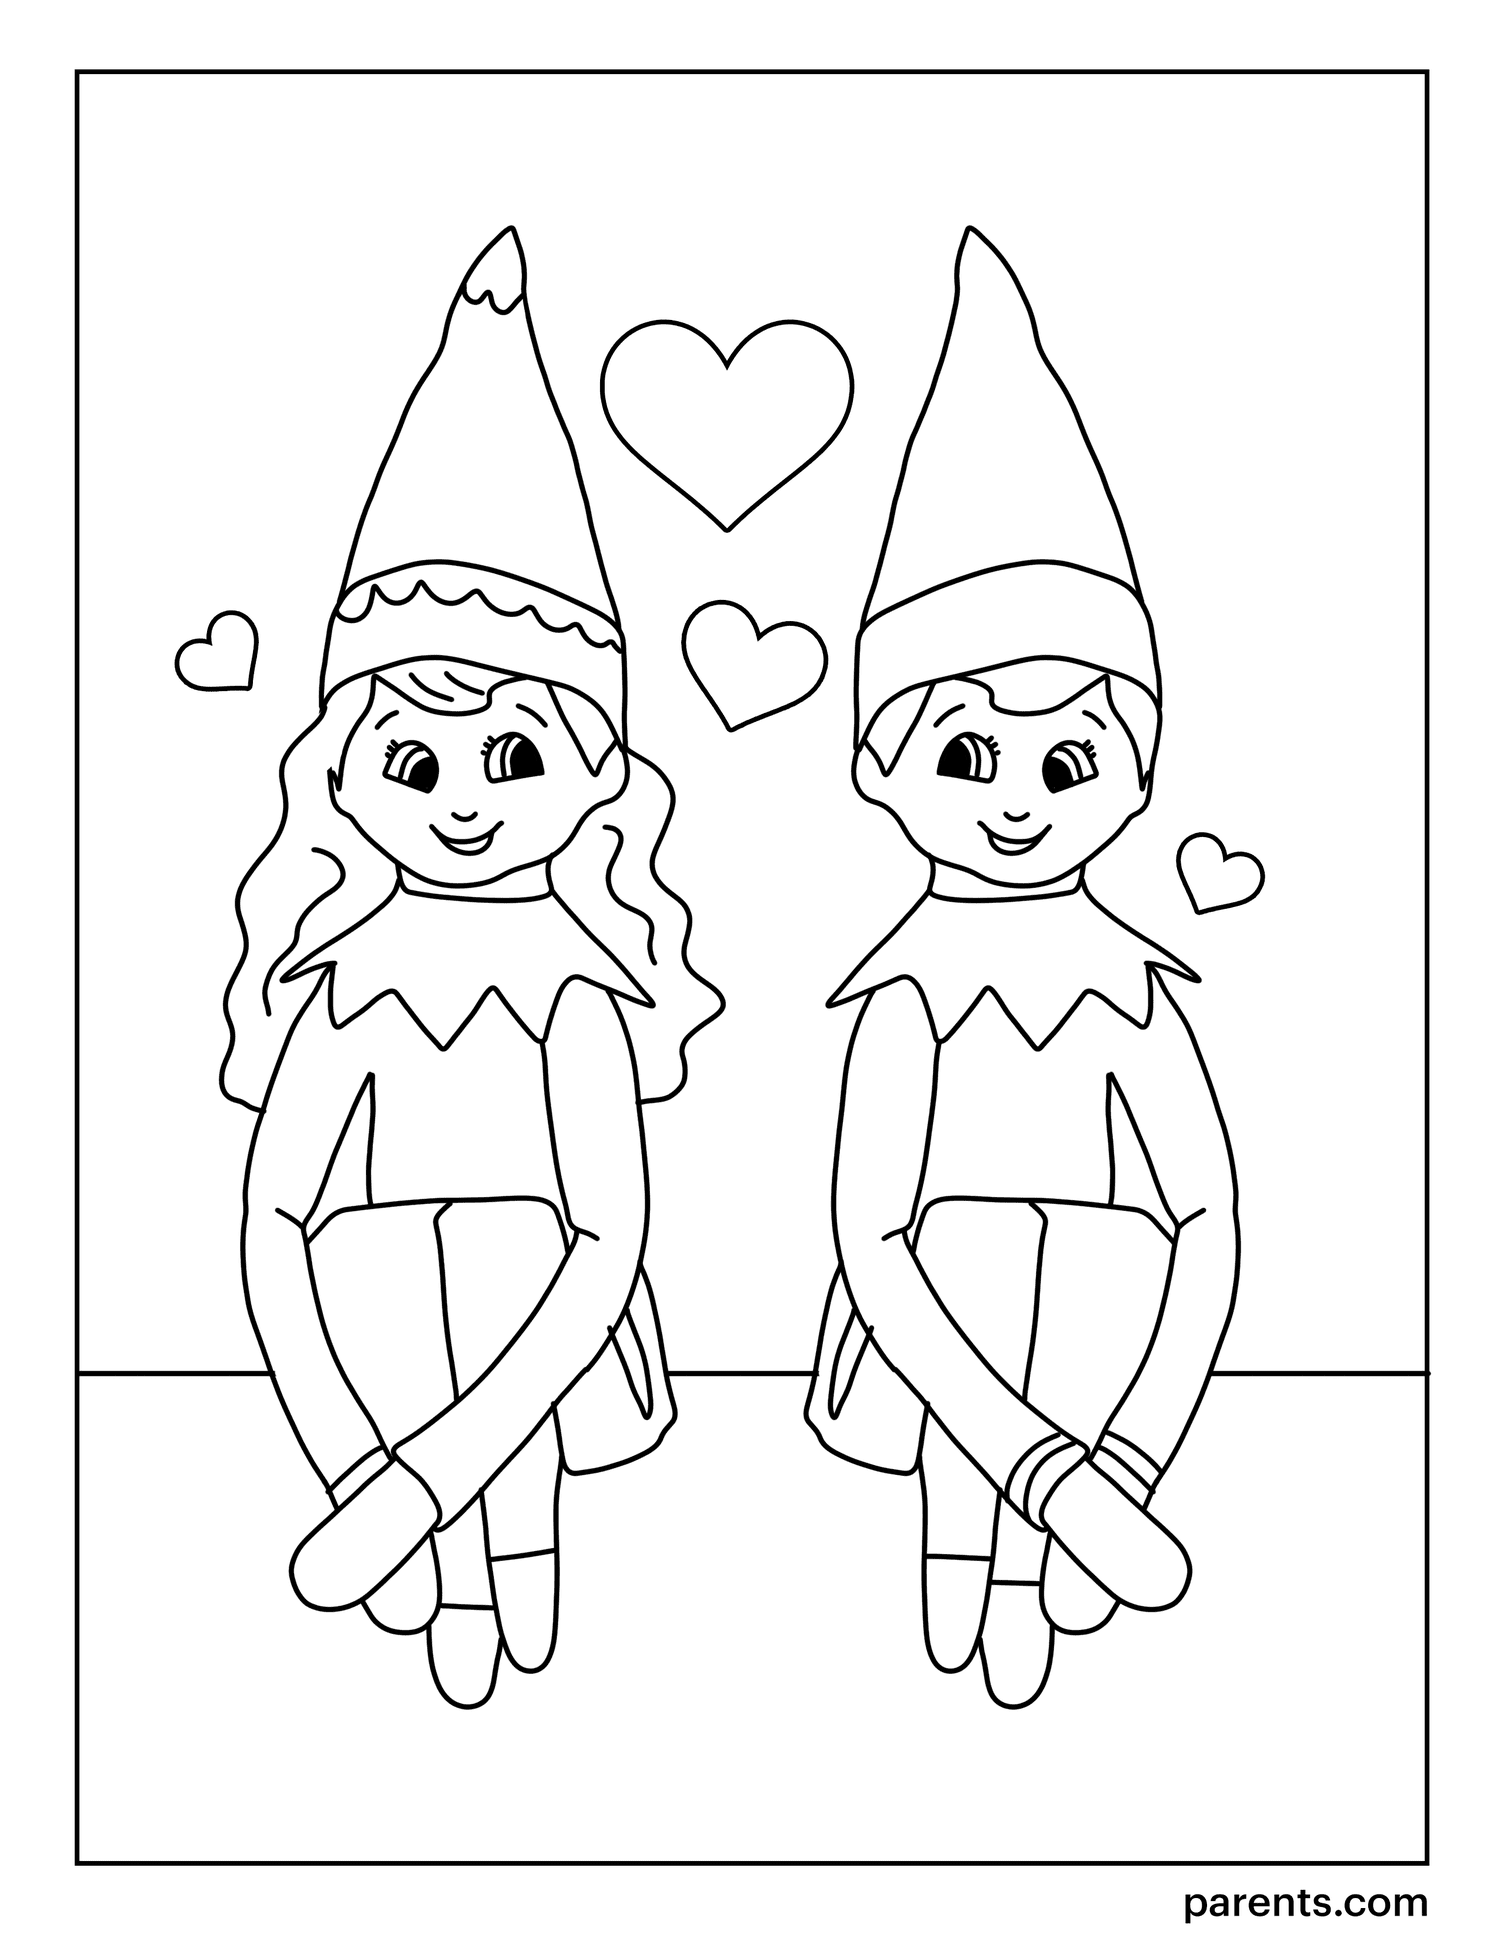 Elf On The Shelf Free Printable Coloring Pages - Get Your Hands on ...